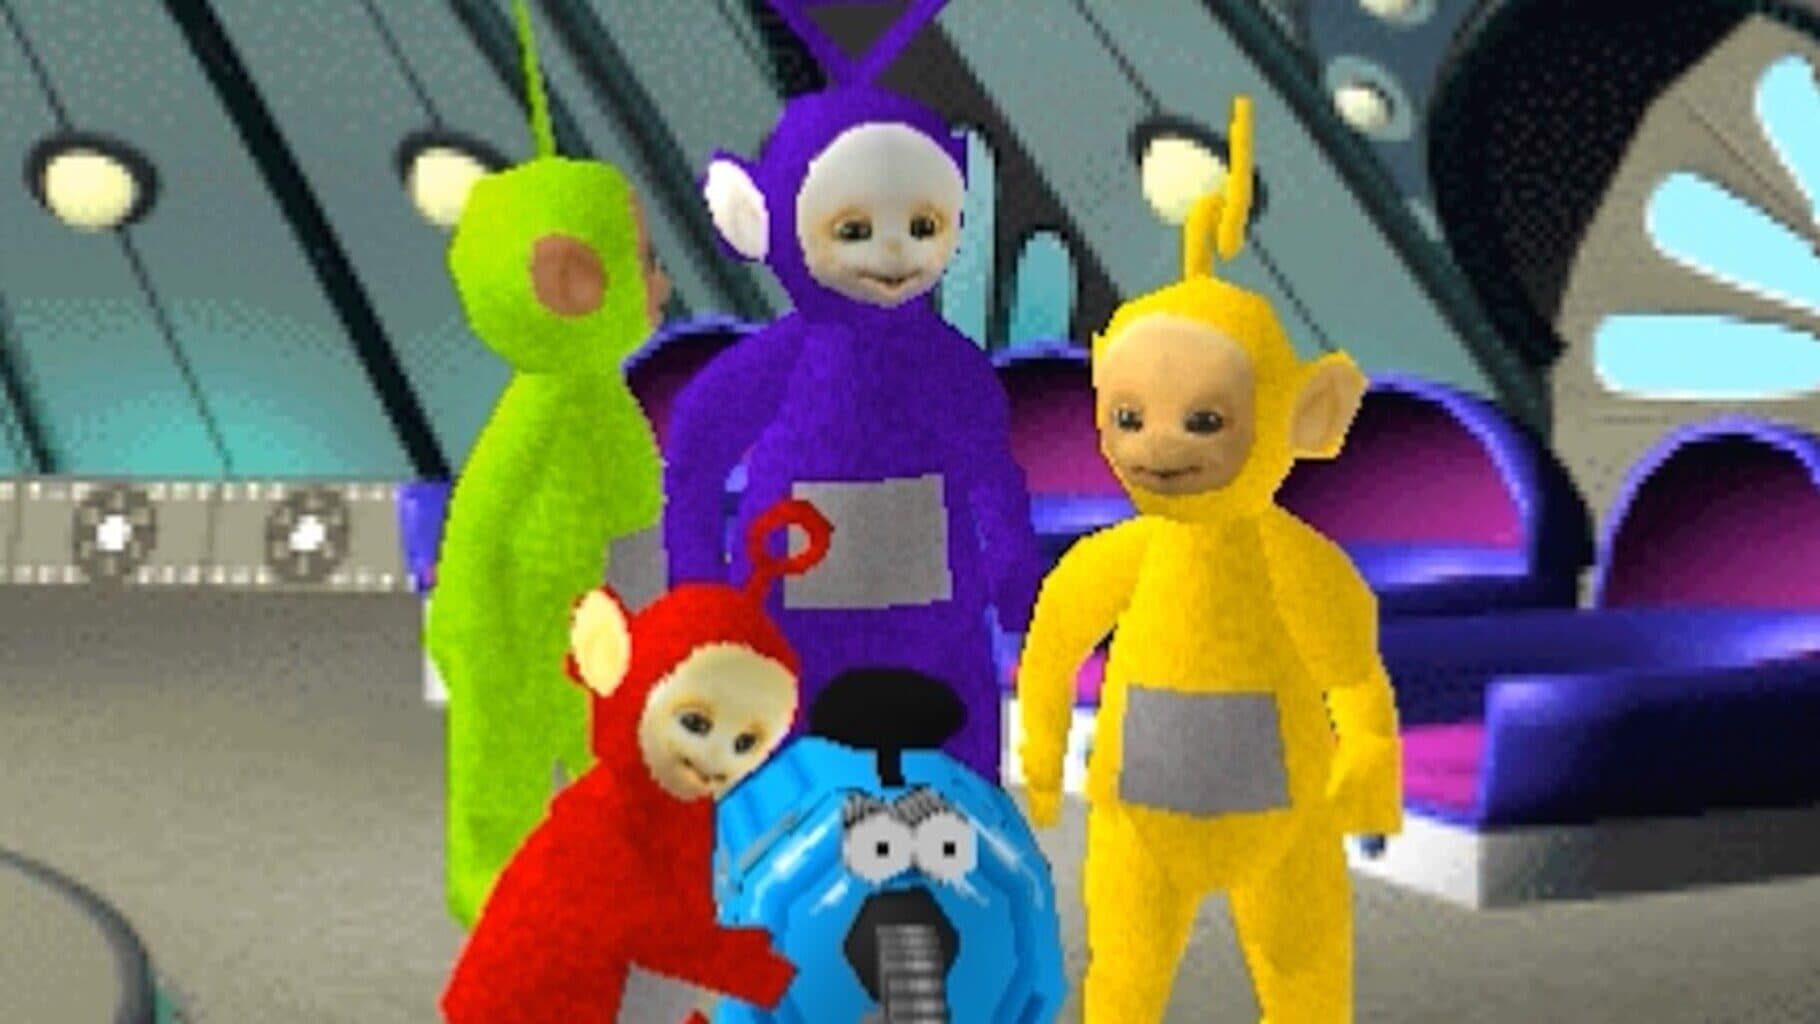 Play with the Teletubbies Image